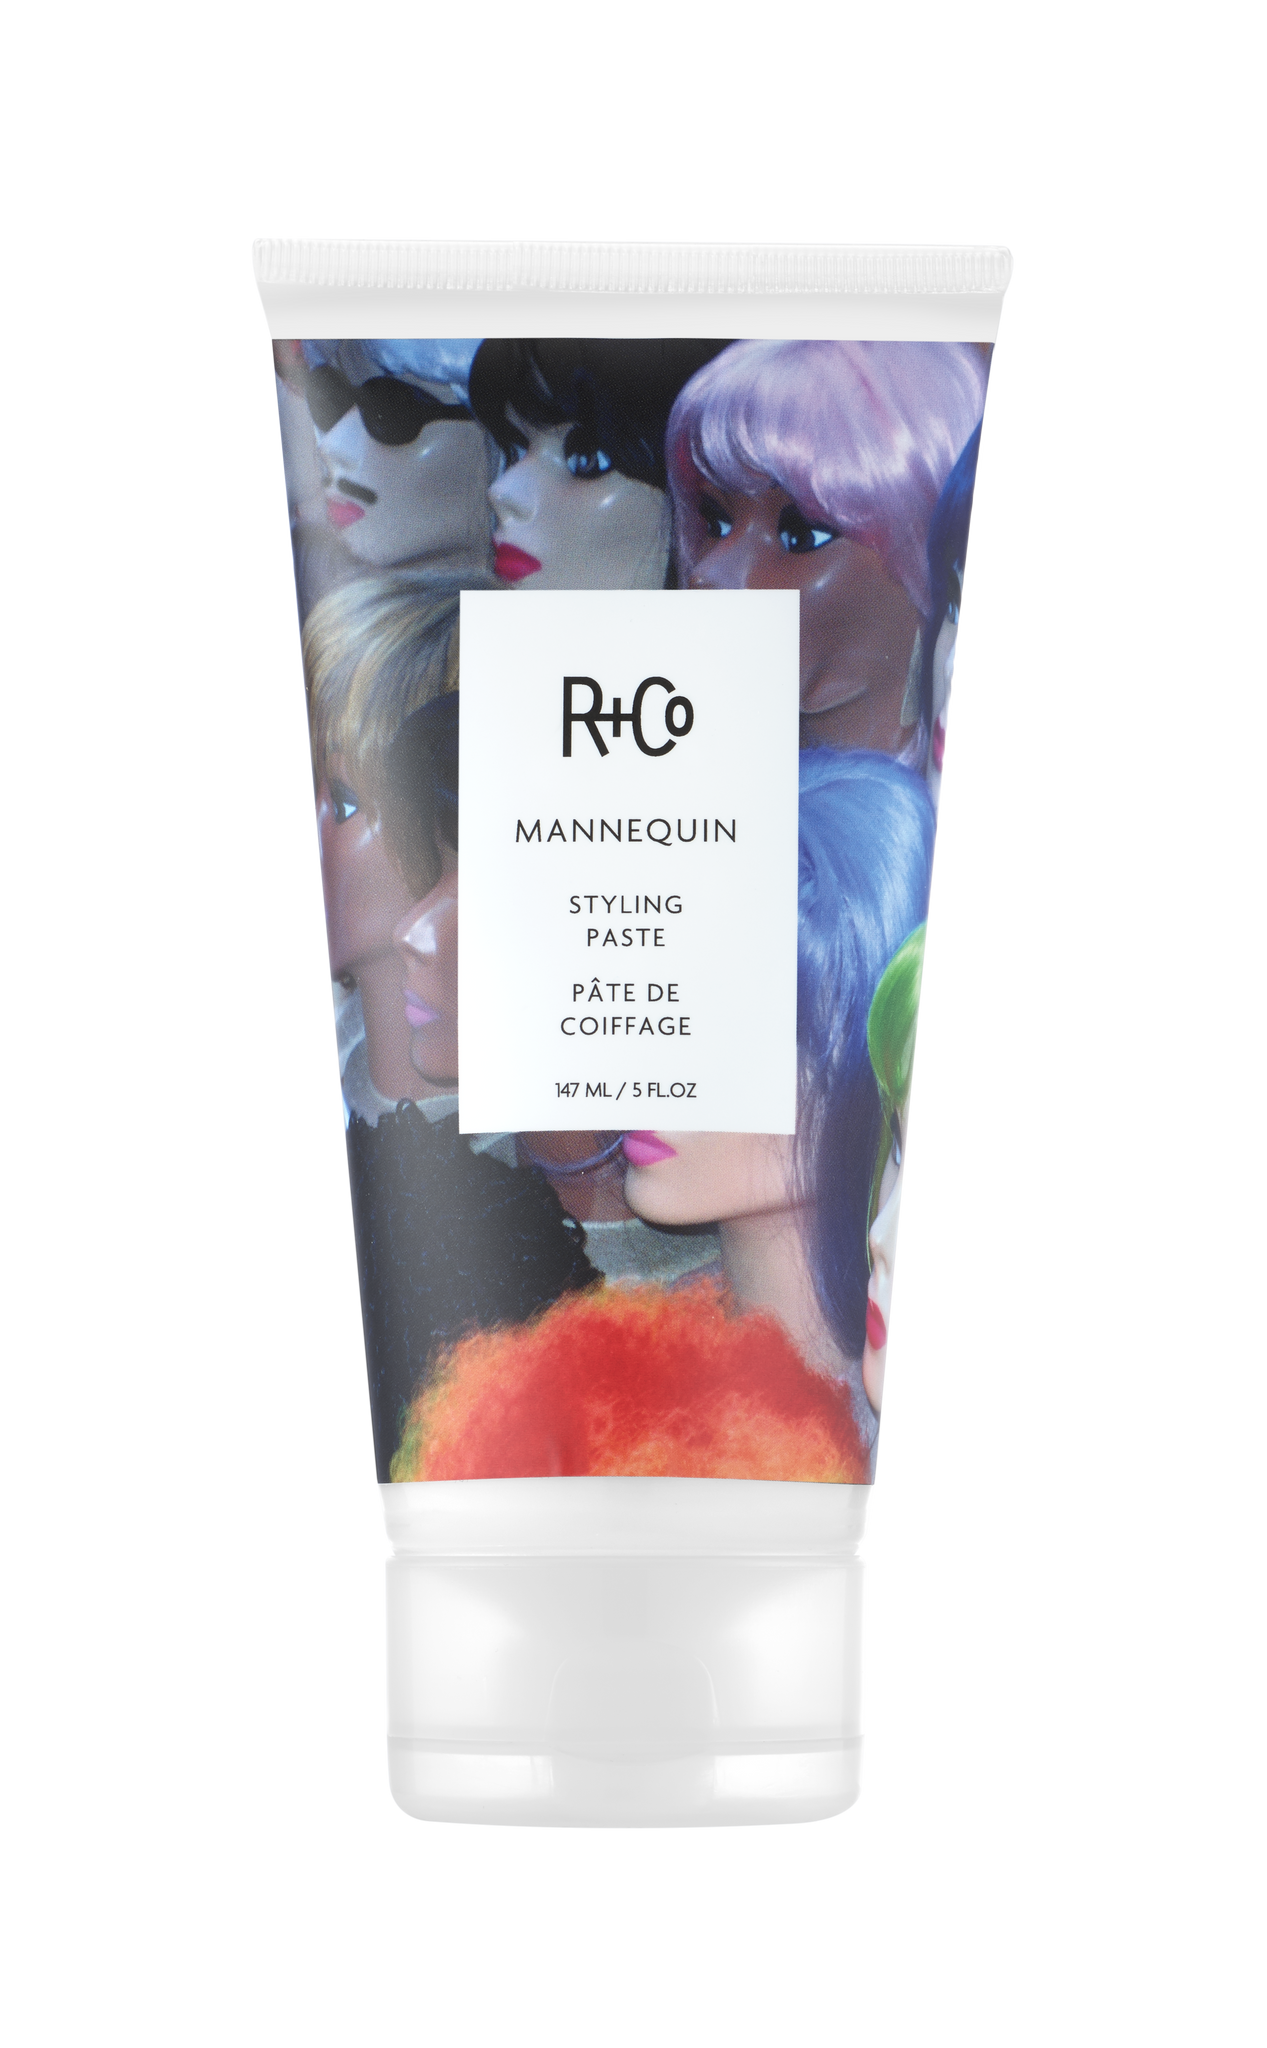 R+Co MANNEQUIN / Styling pasta 147ml